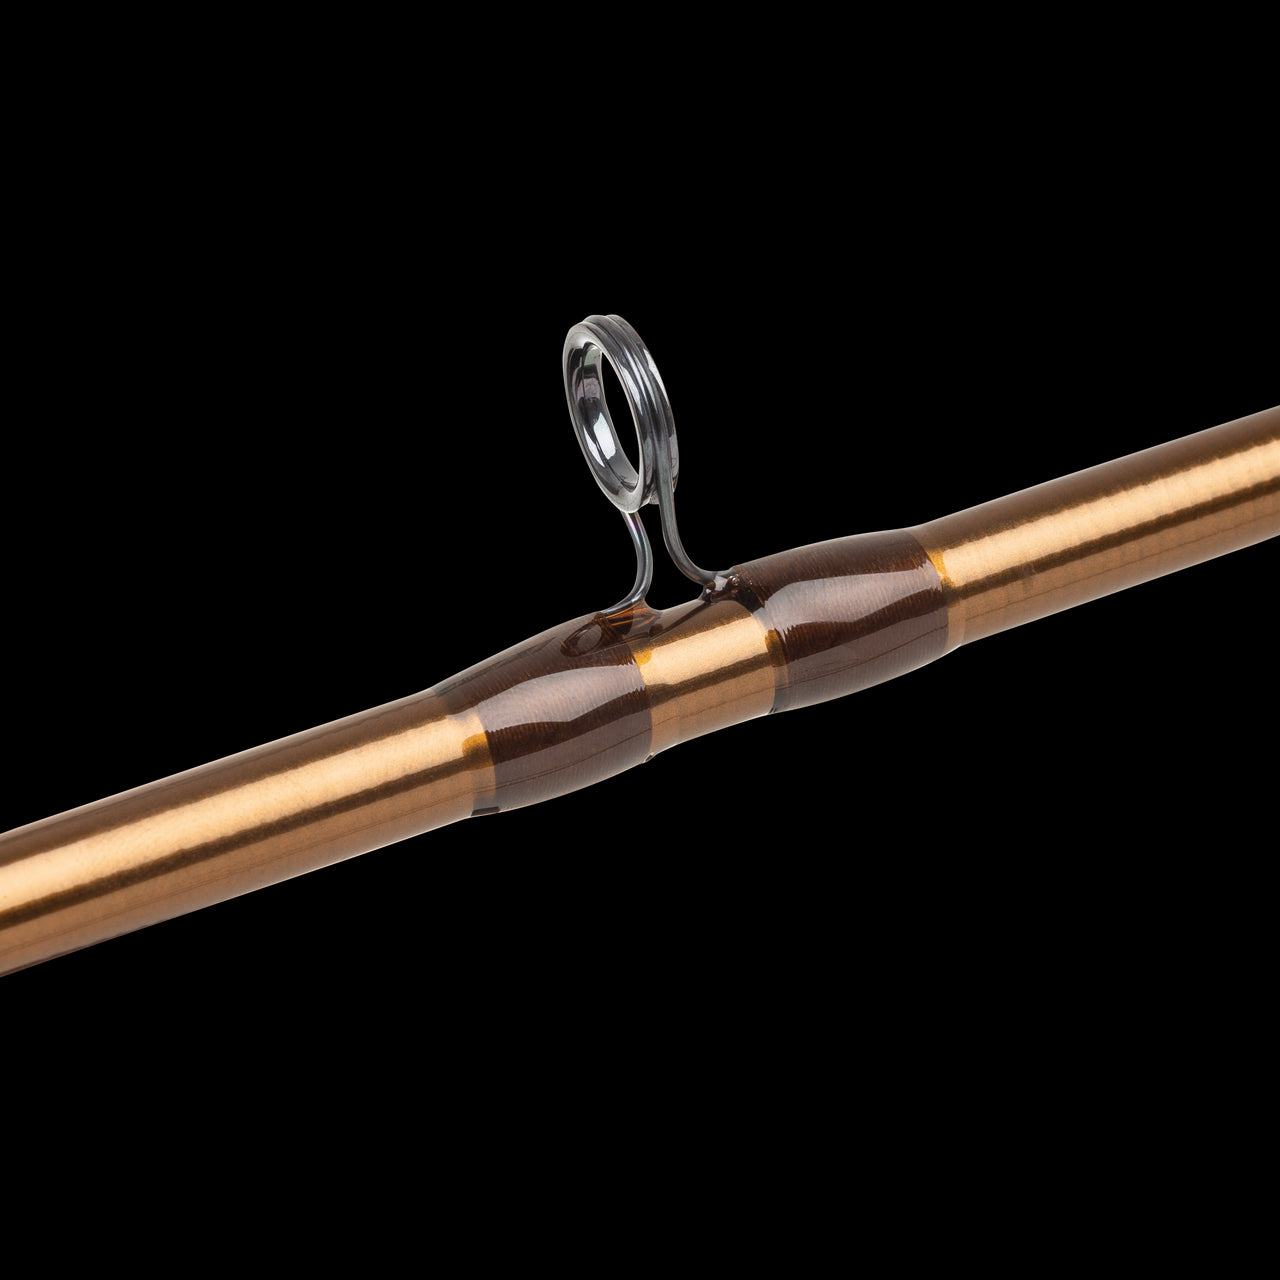 Hardy Ultralite LL Fly Rod – Tactical Fly Fisher